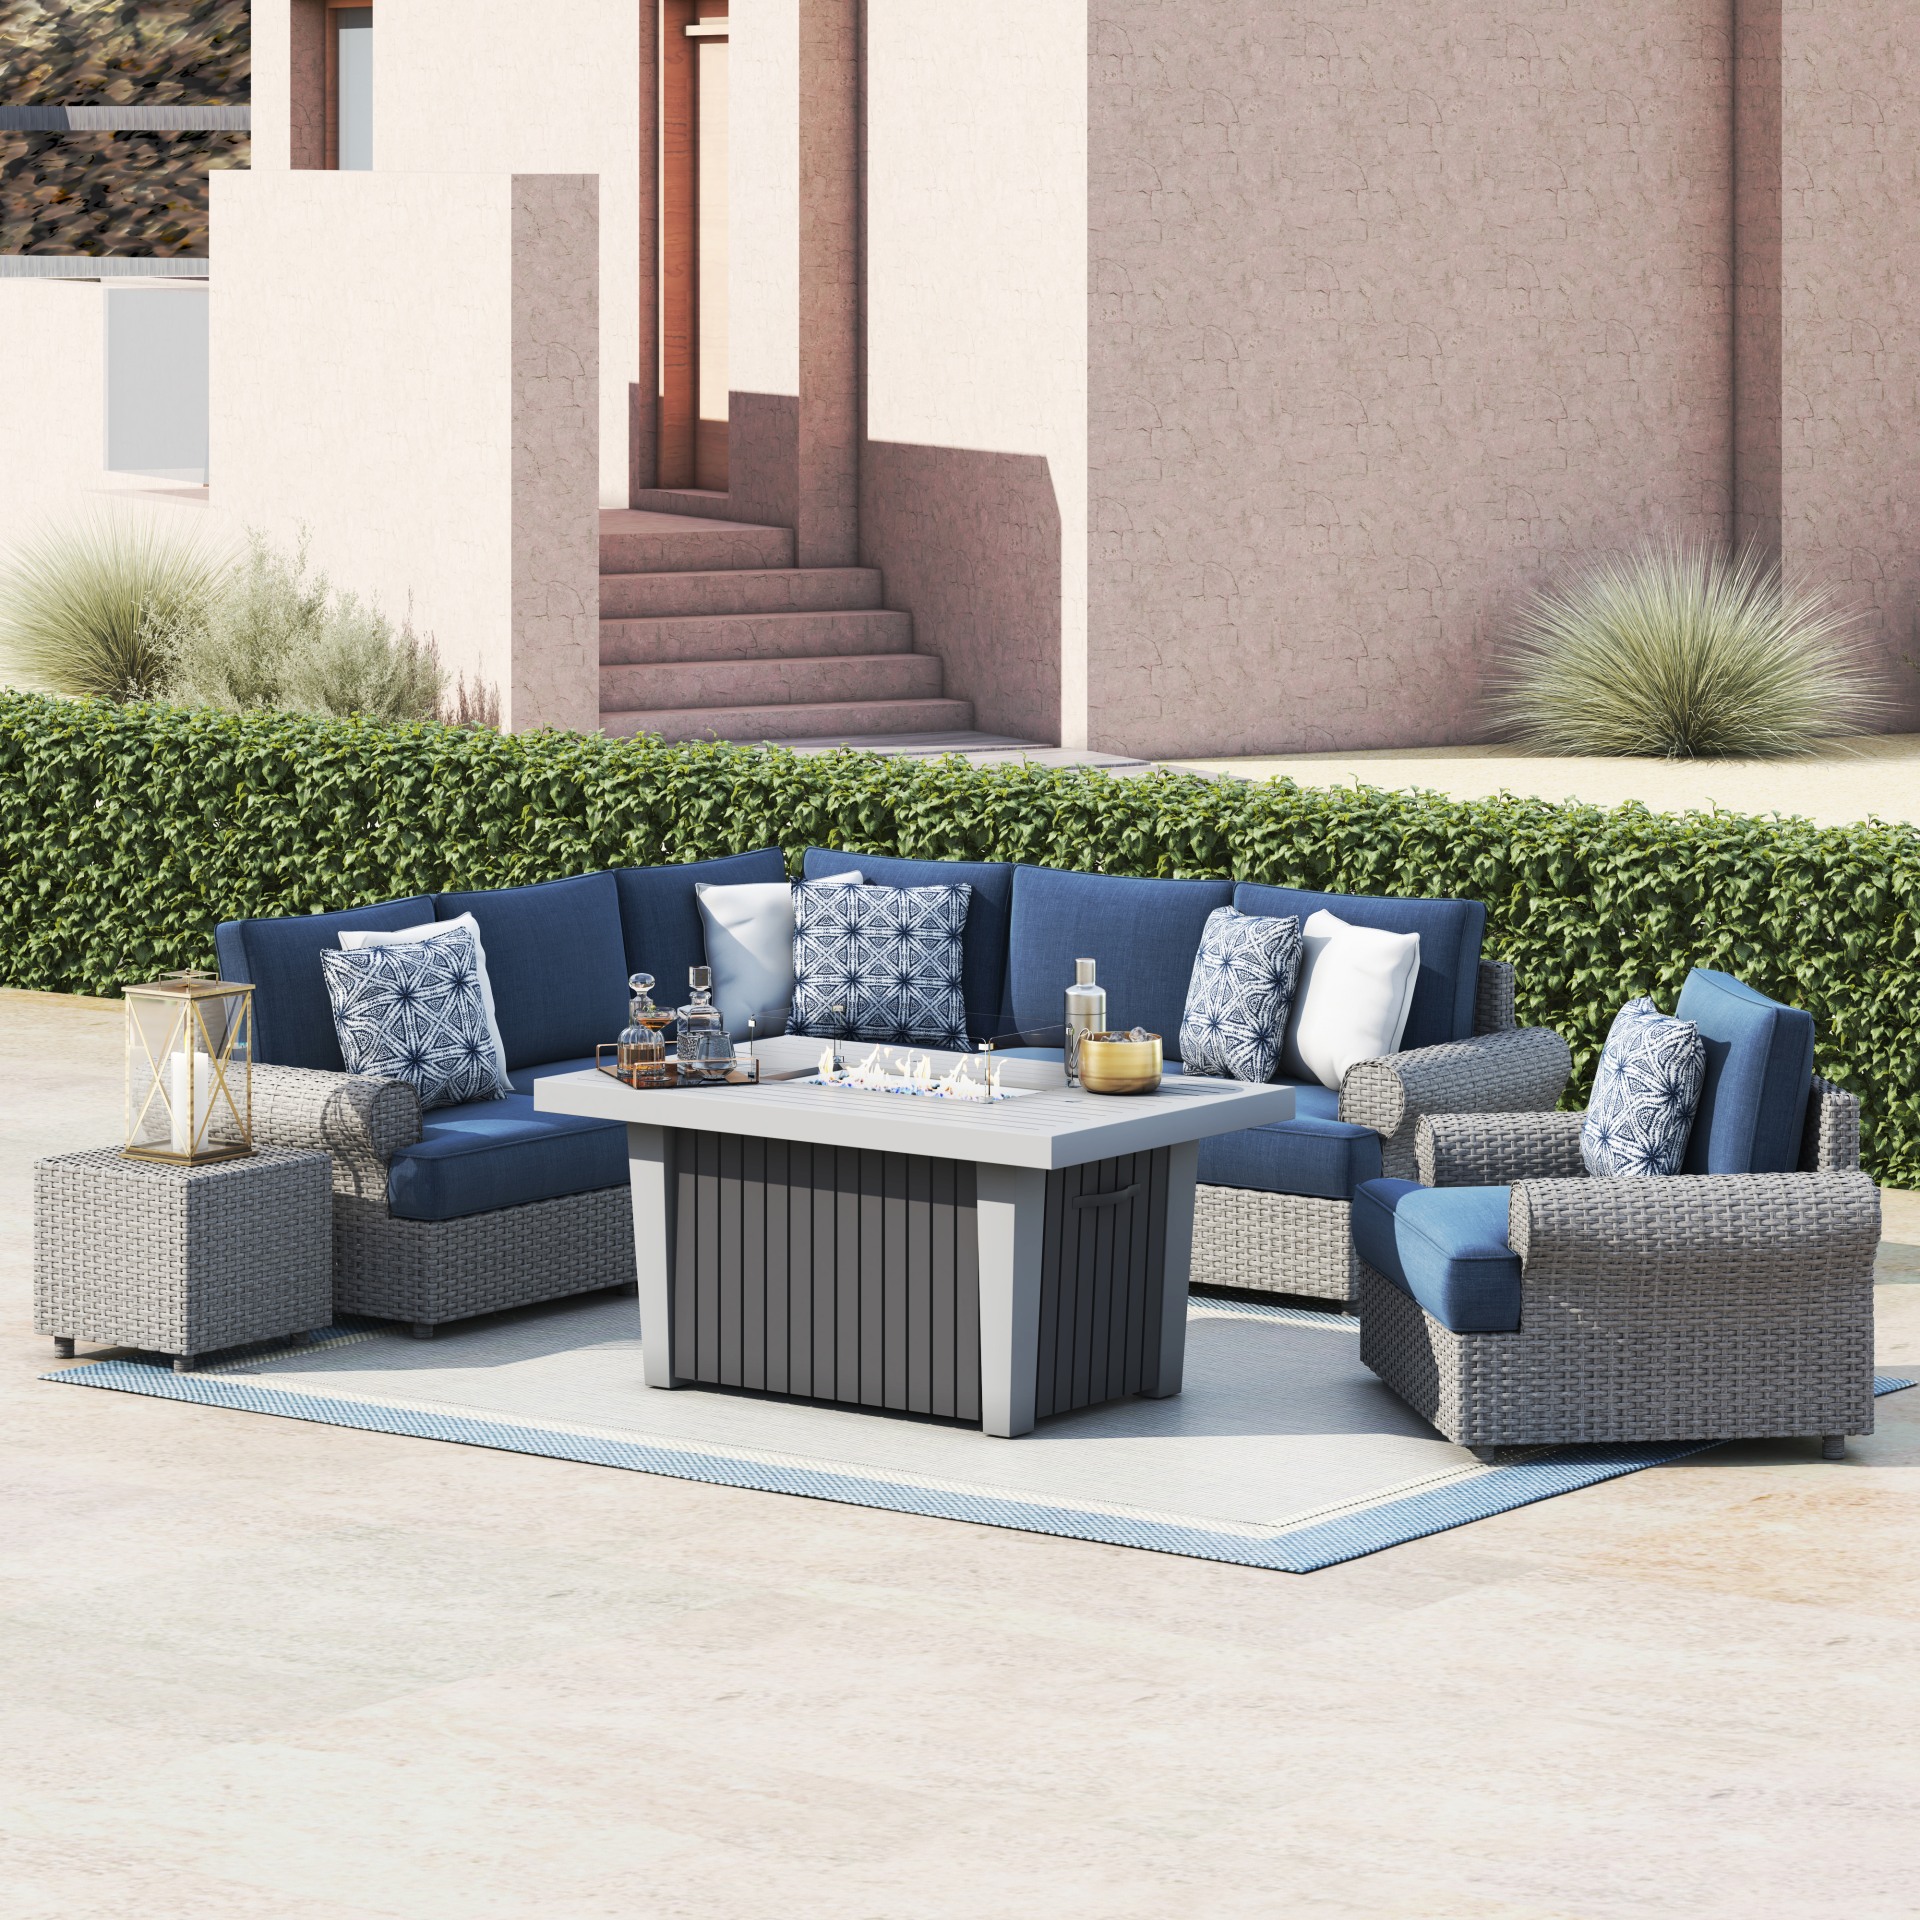 Sirio Regency 8 Piece Seating Set With, Fire Pit Seating Set